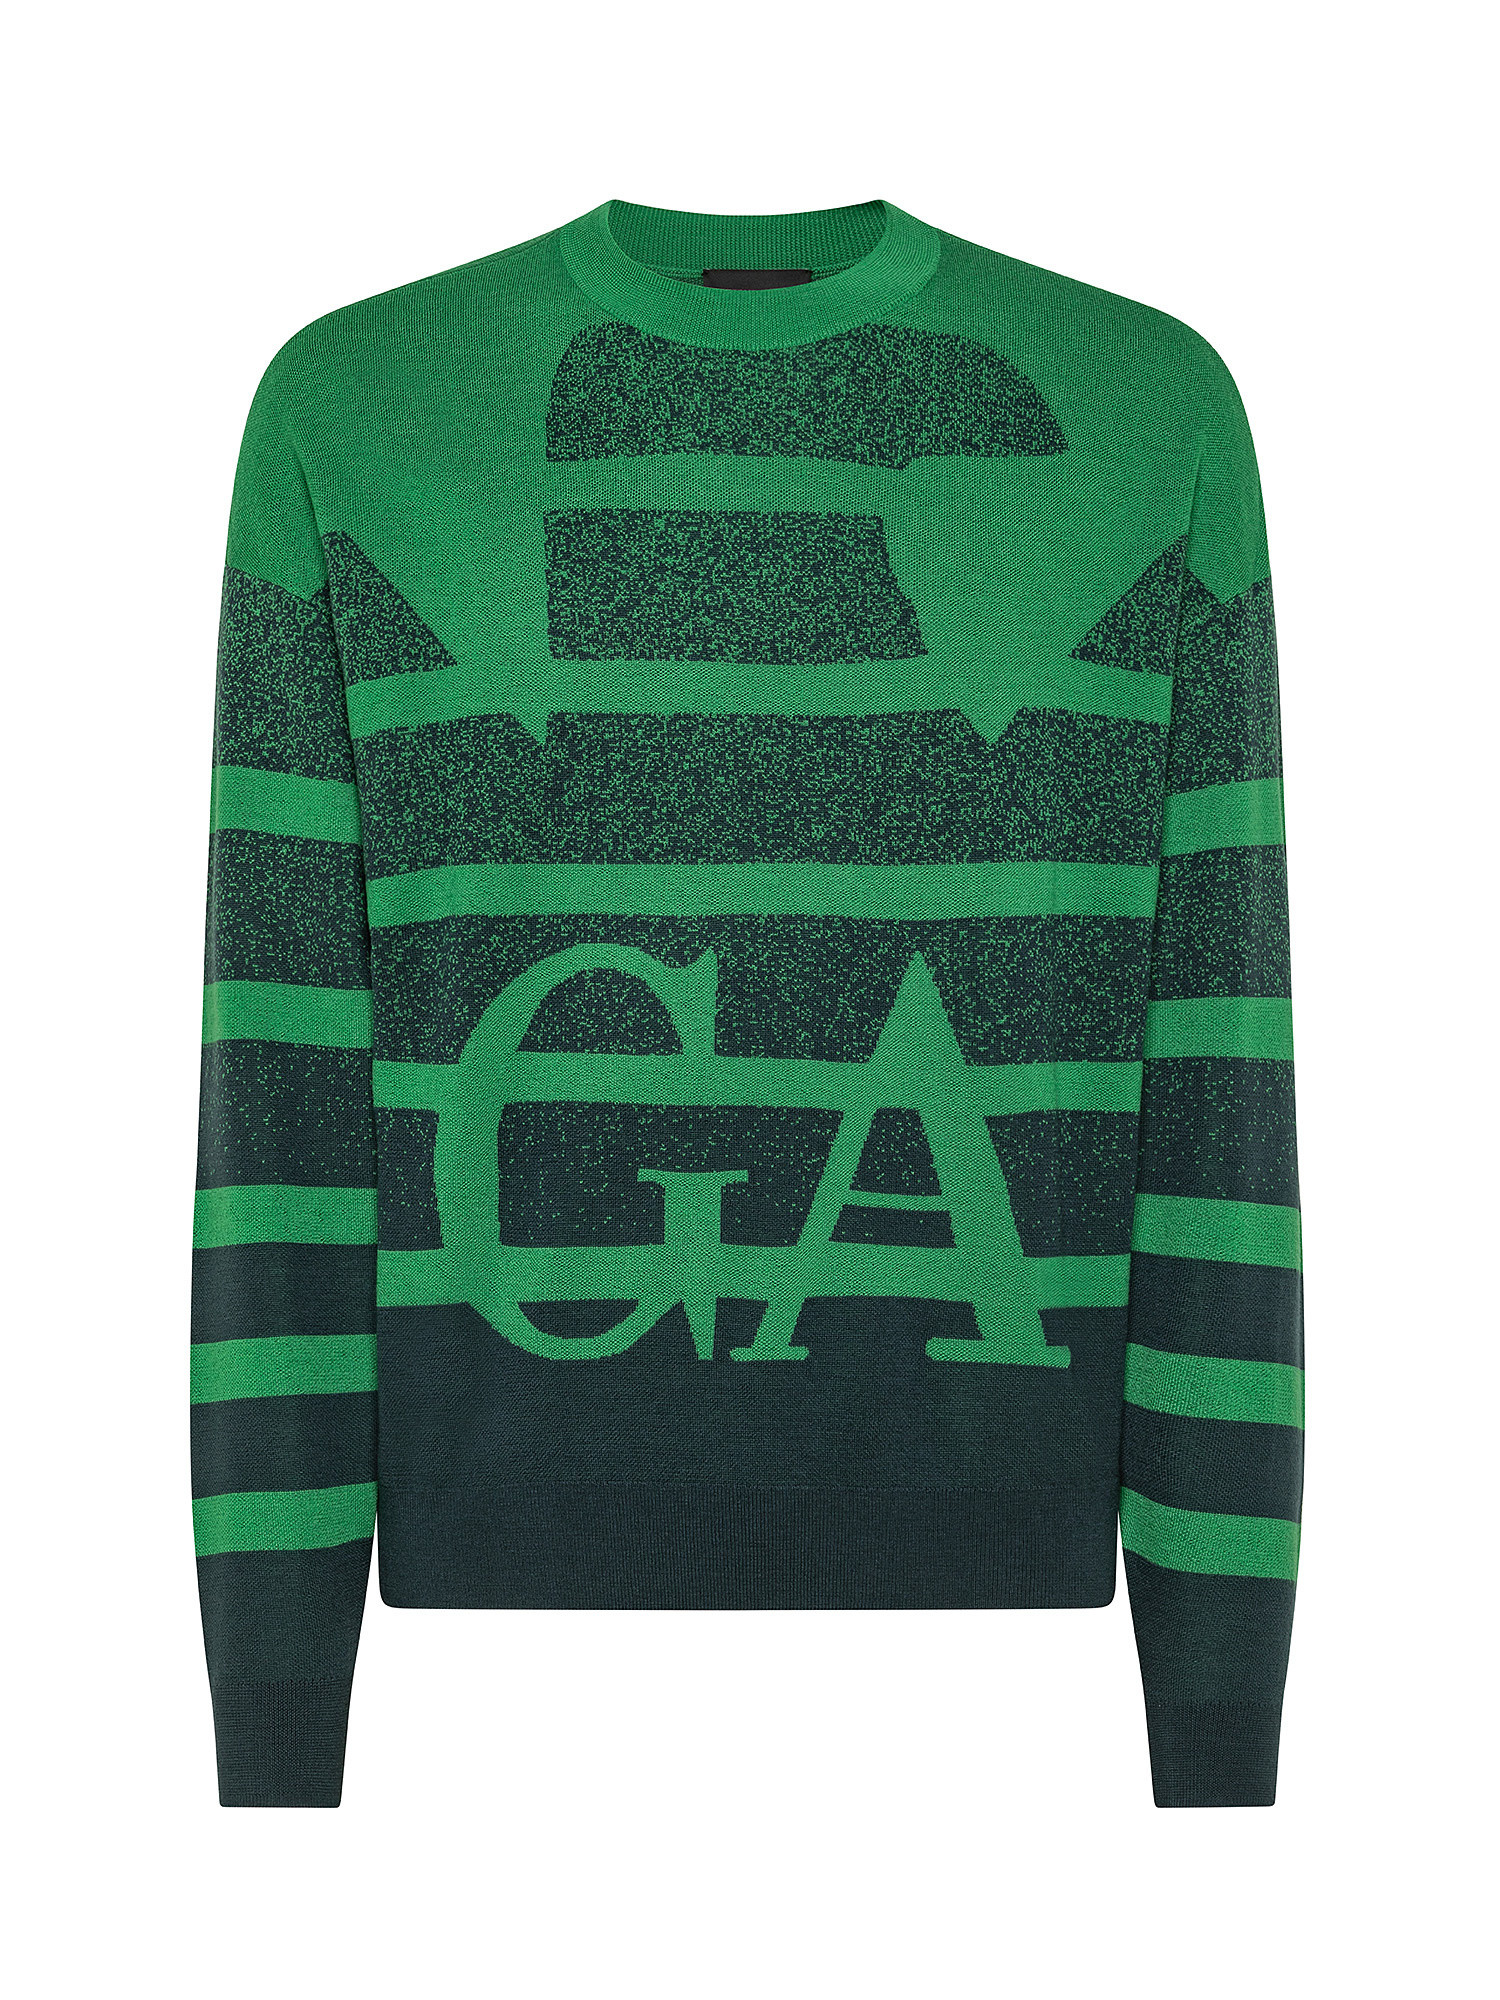 Maglione a righe con logo, Verde, large image number 0